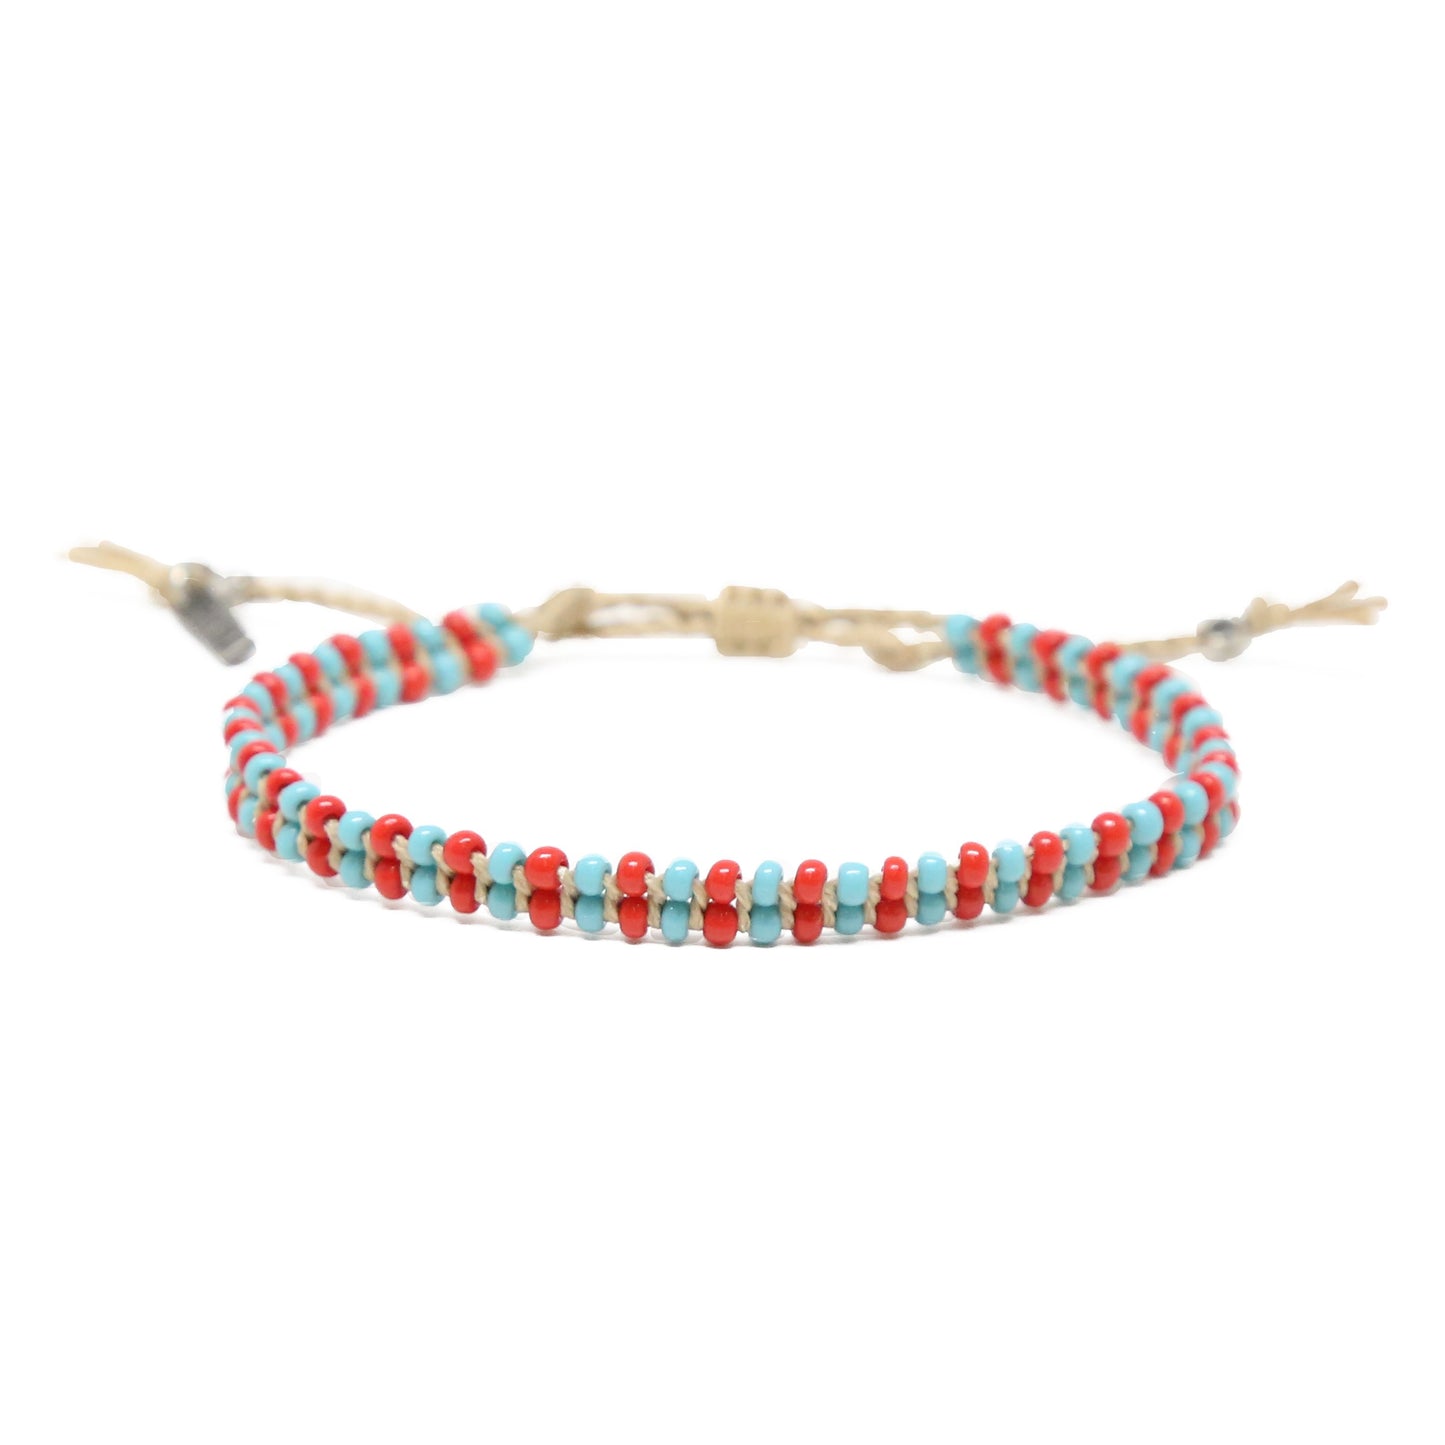 About Those Vibes Bracelet in Turquoise, Red, and Tan